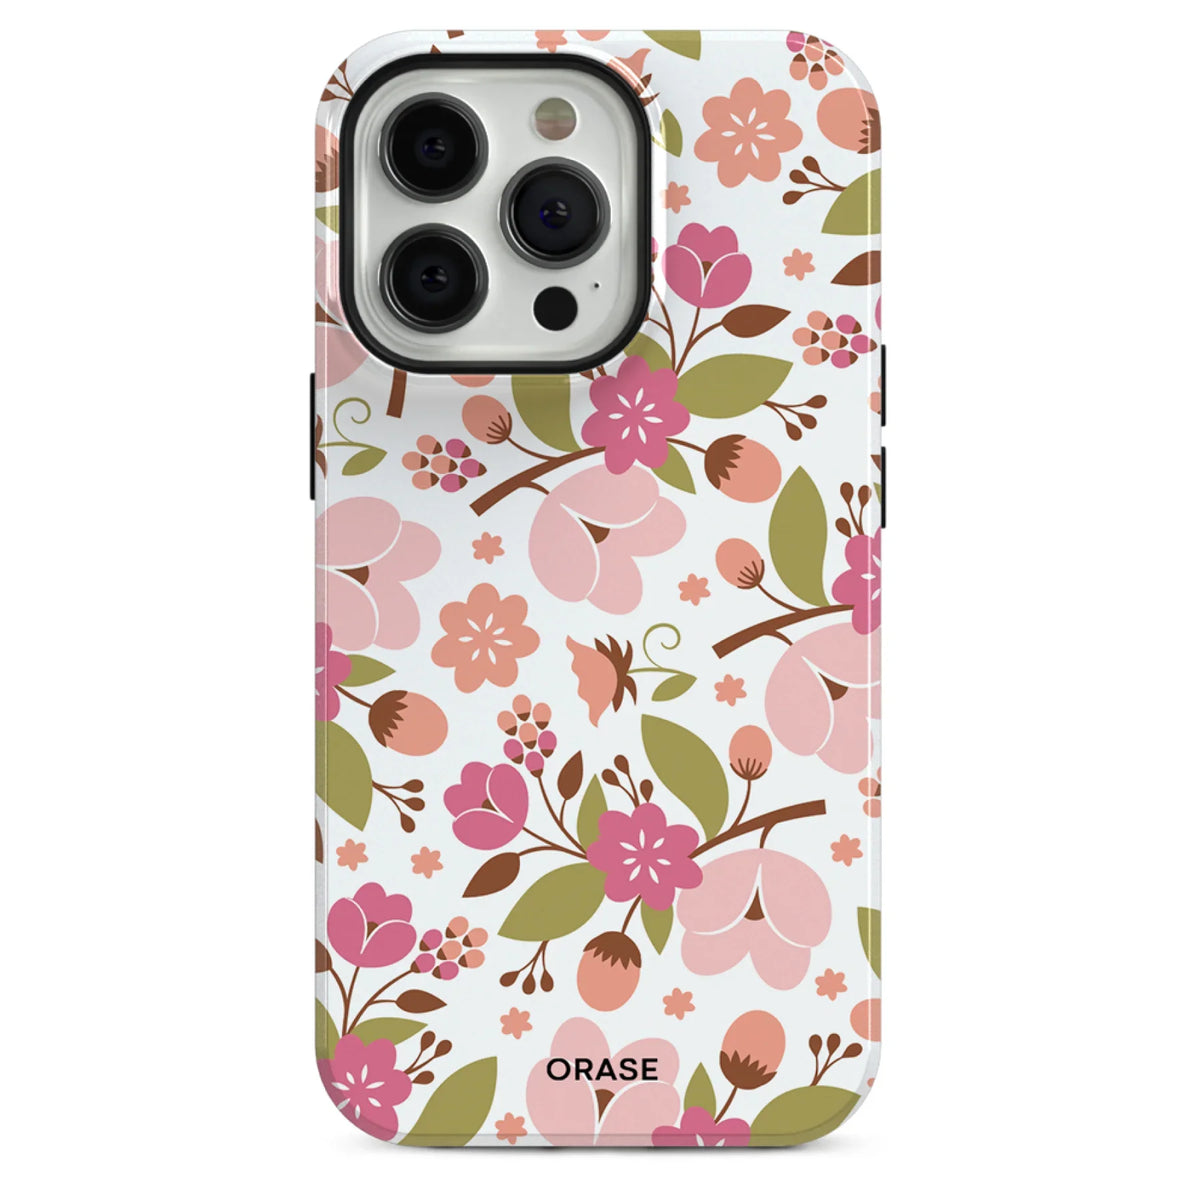 Flora Charms iPhone Case - iPhone 11 Pro